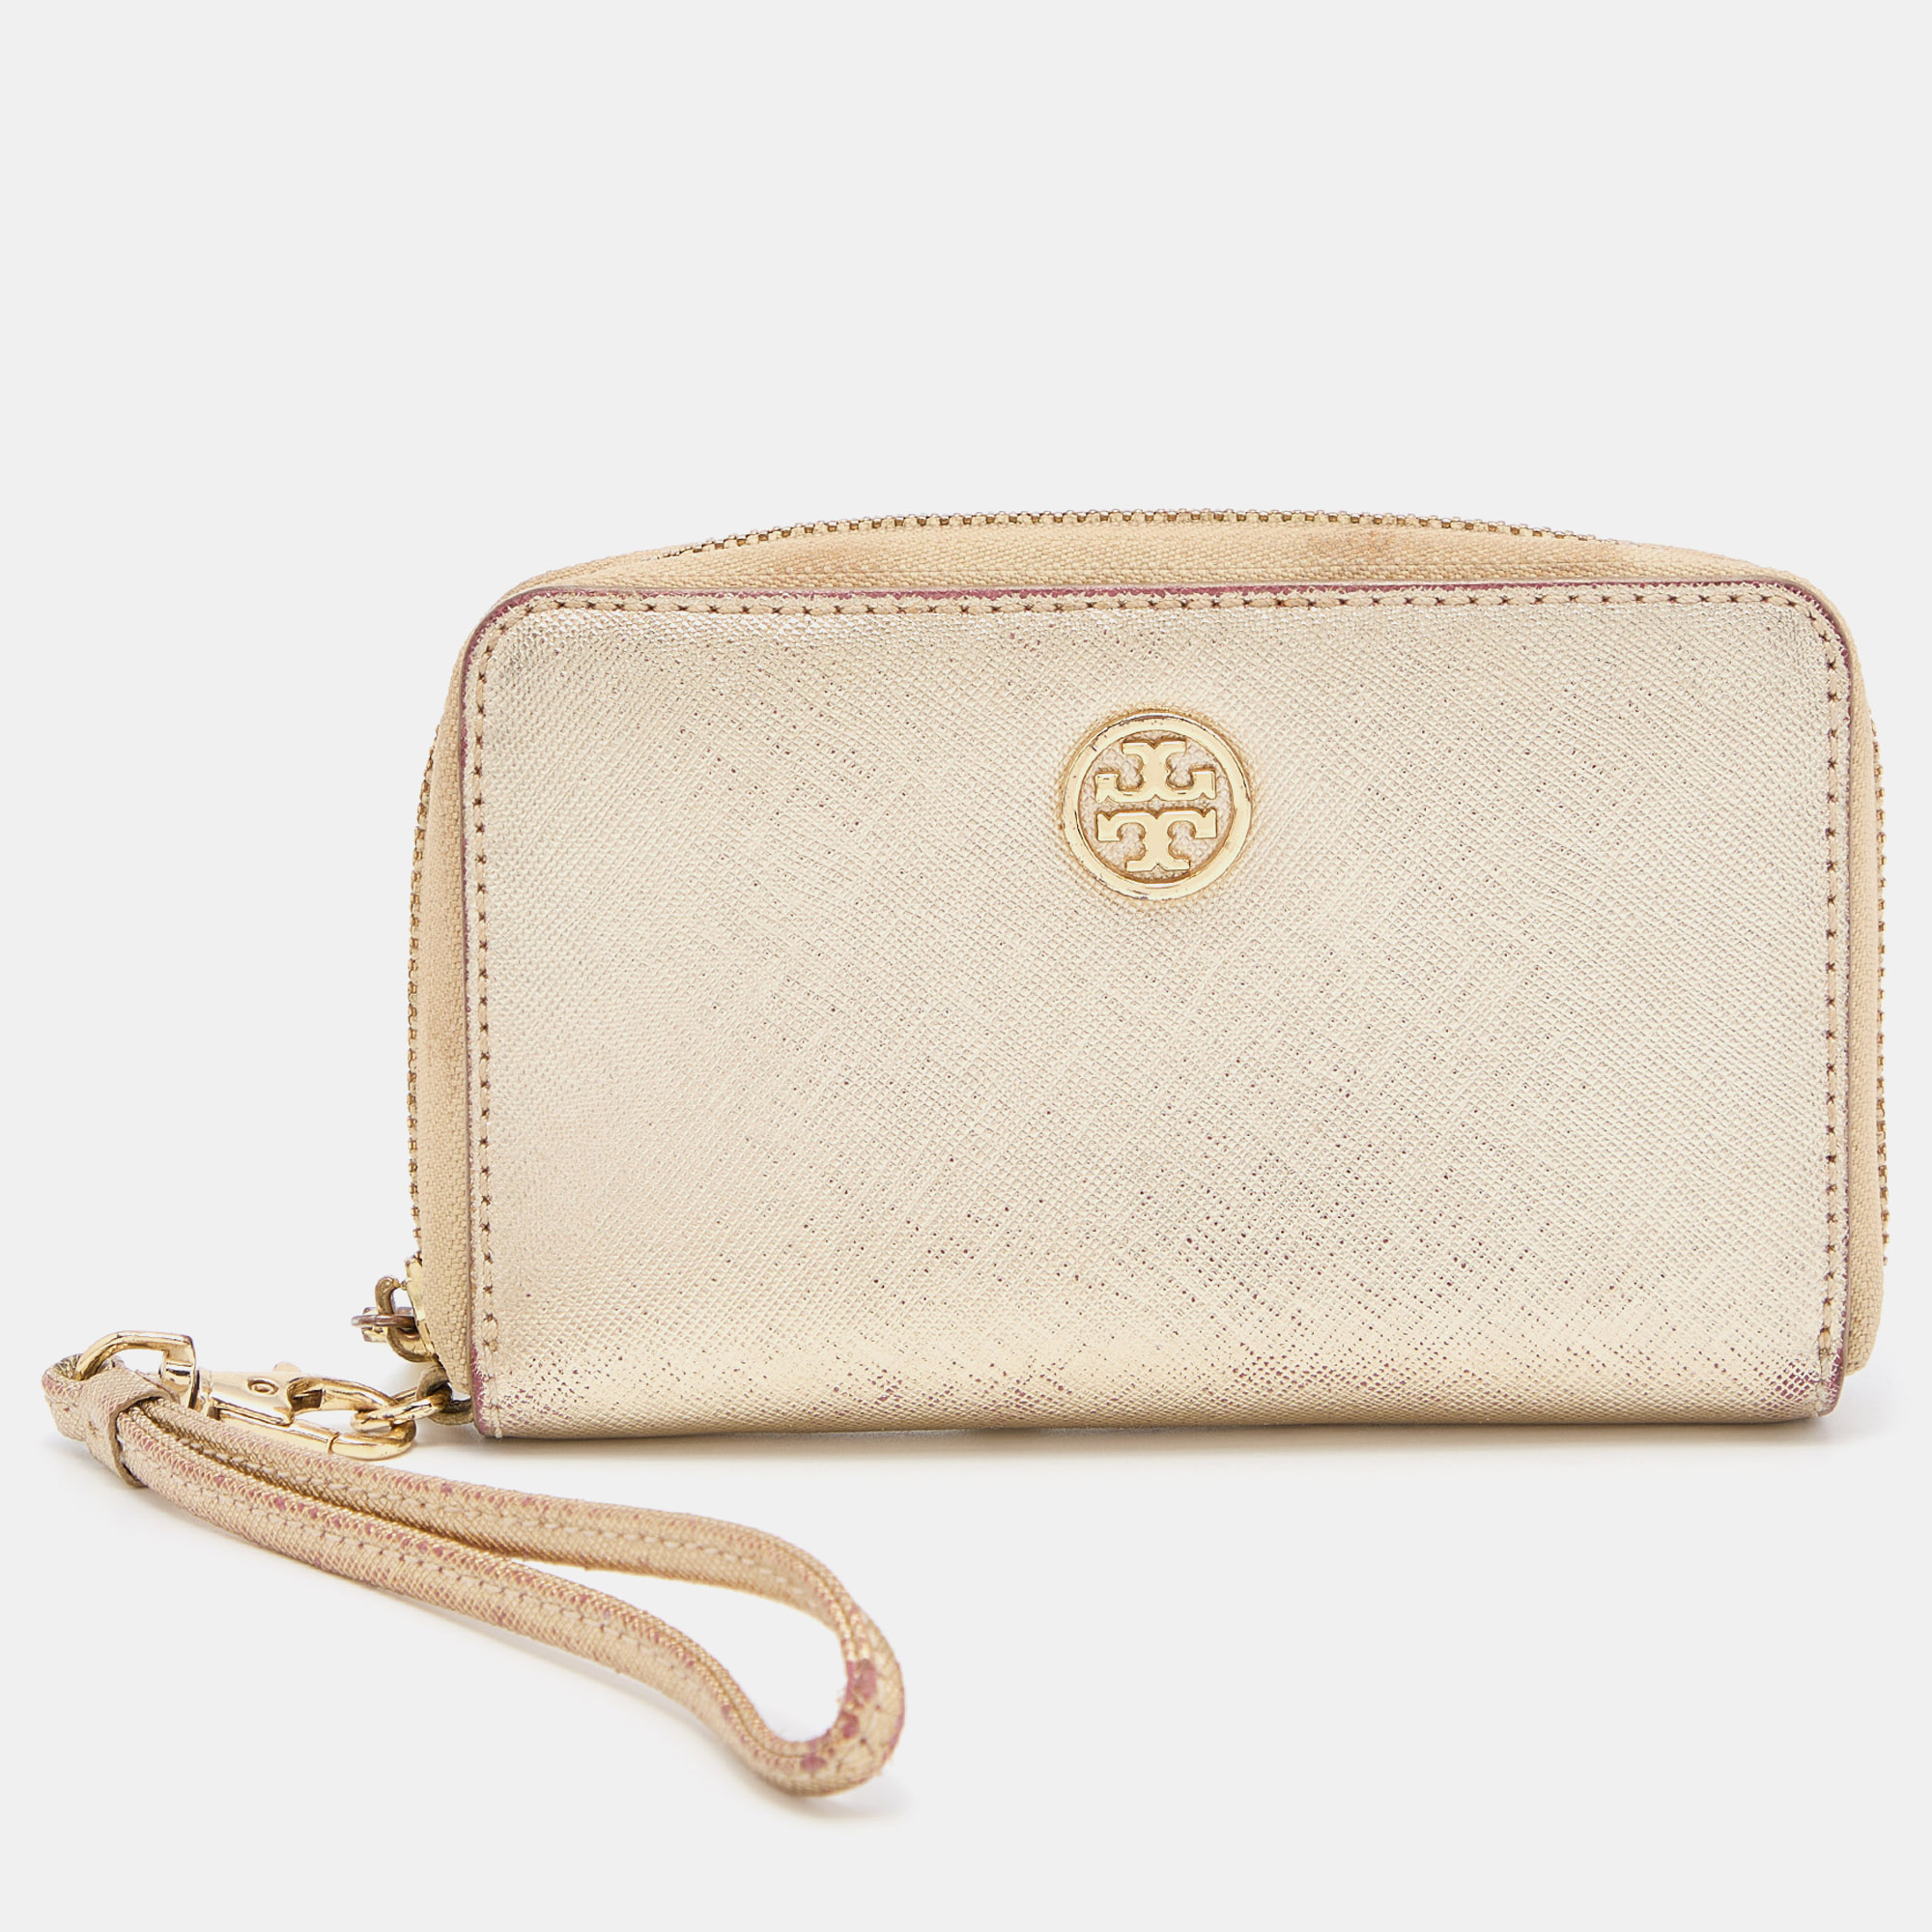 Pre-owned Tory Burch Gold Leather Zip Around Wristlet Wallet